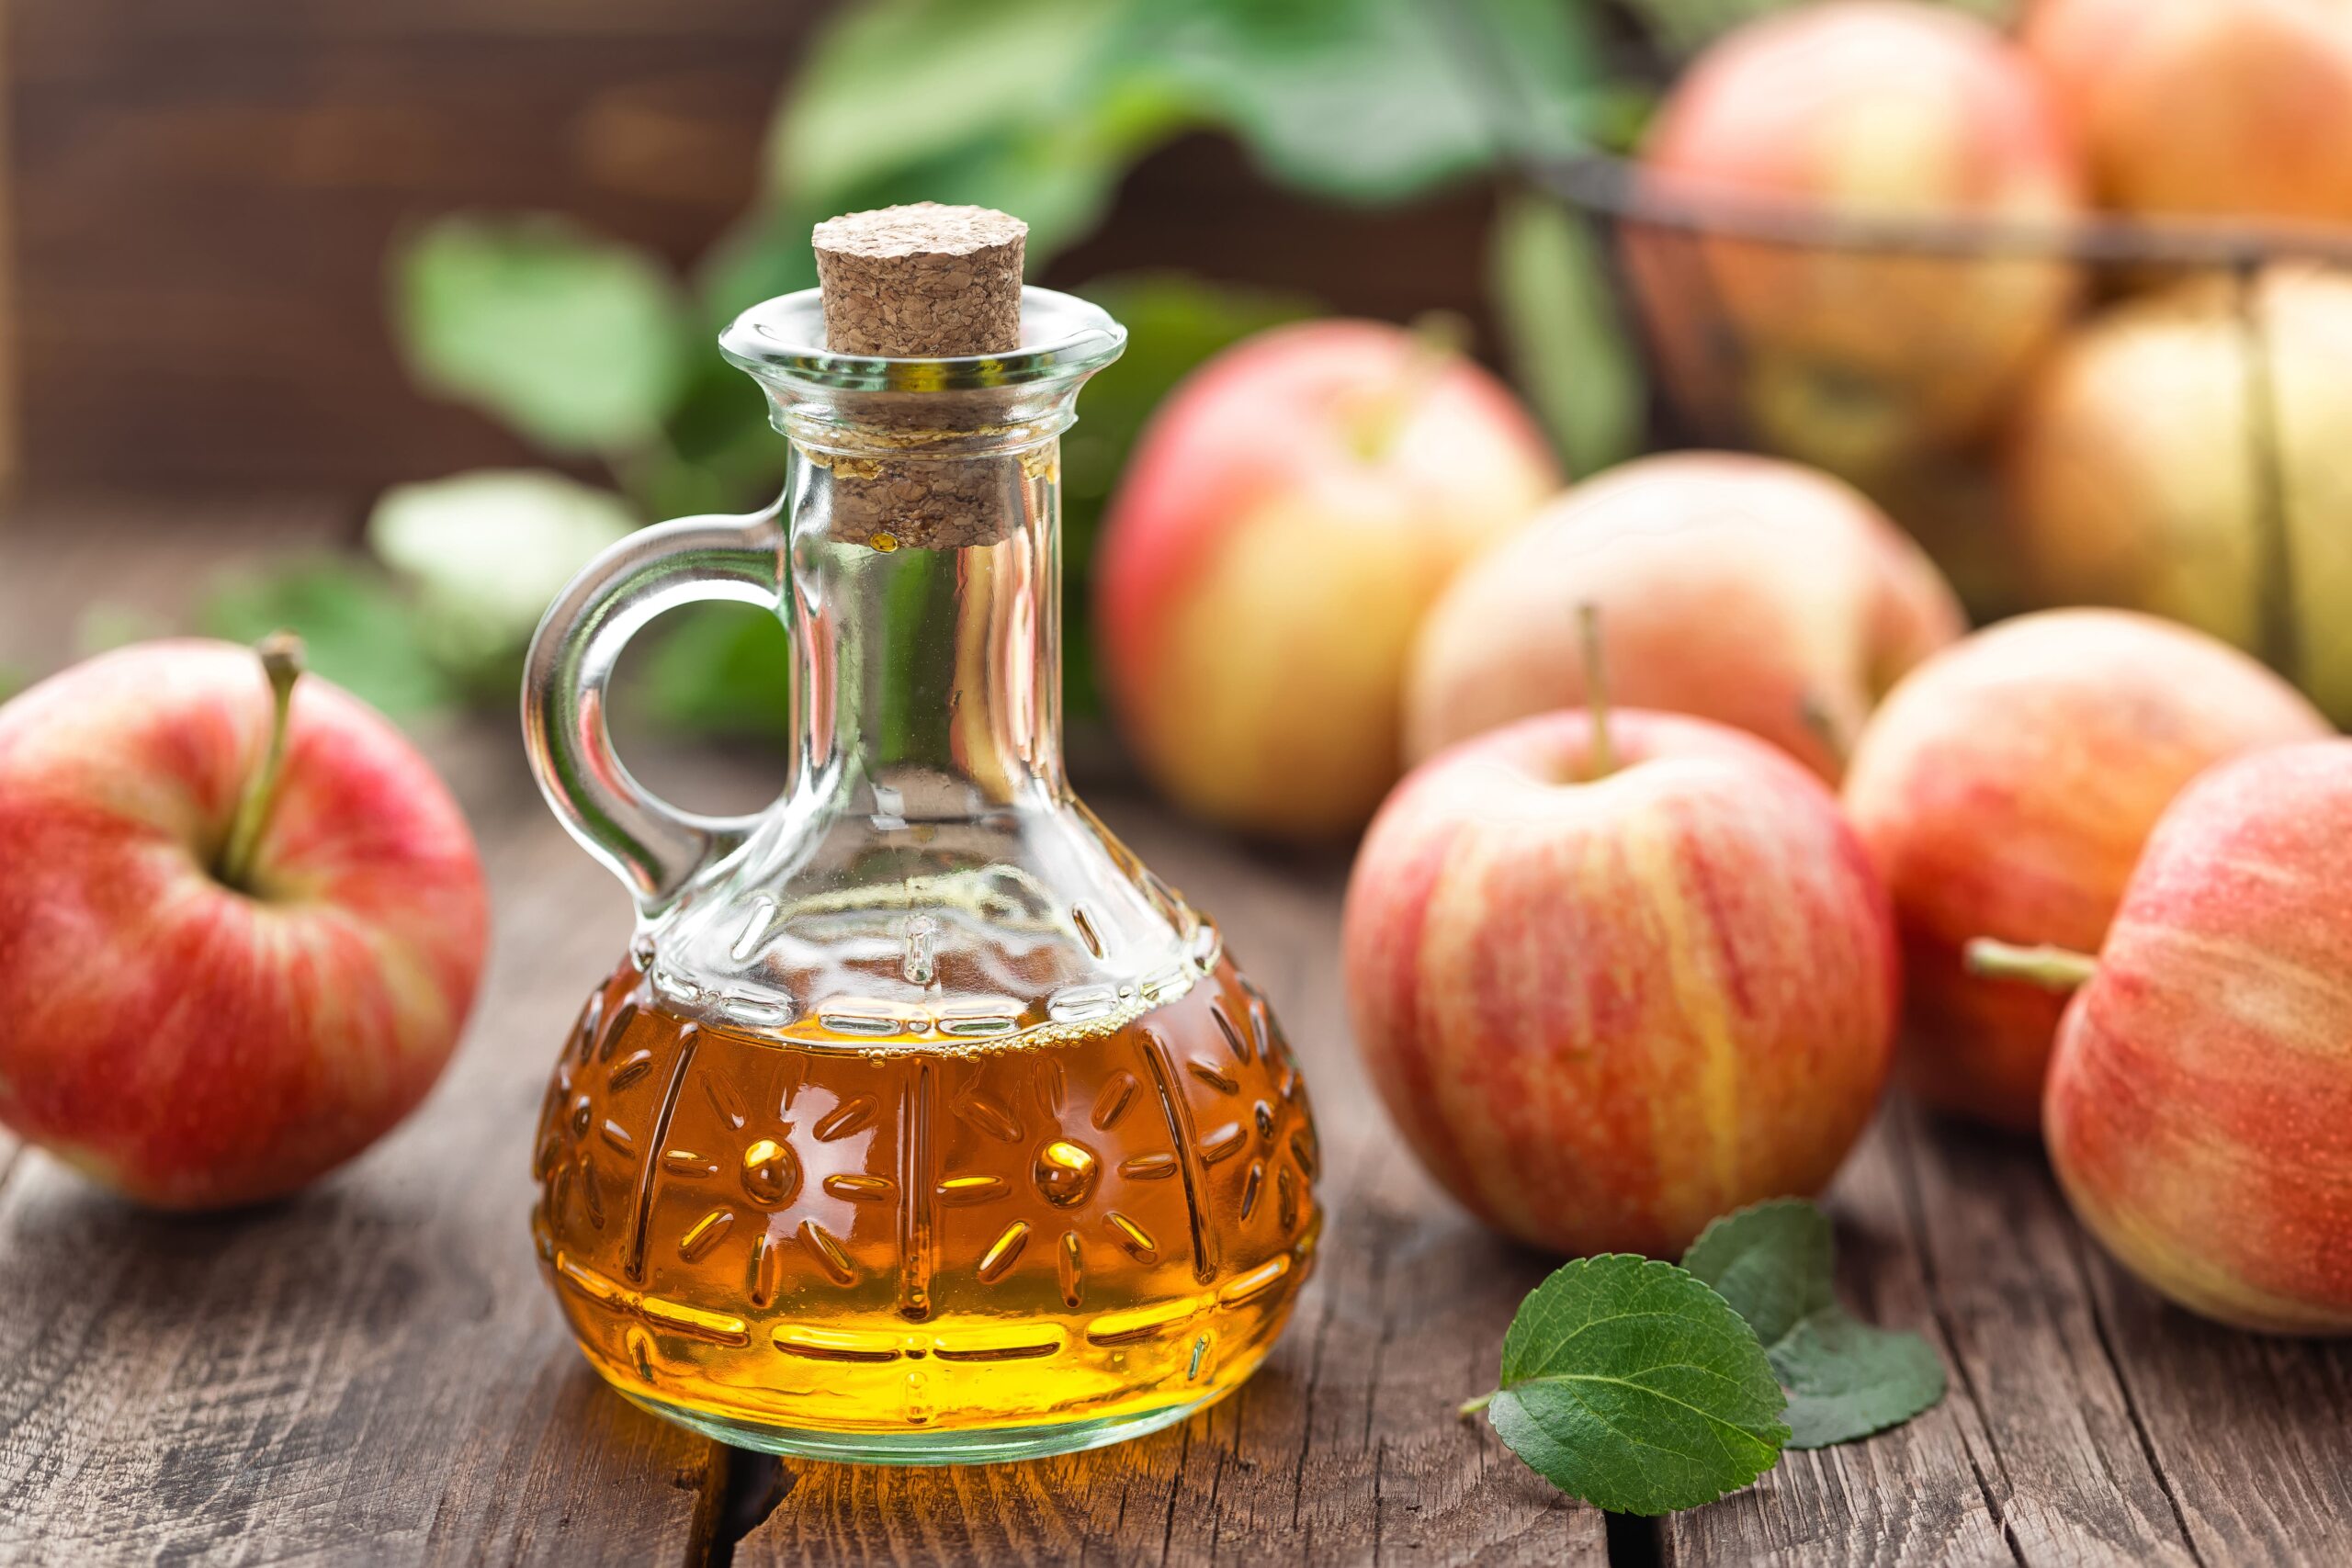 is Apple Cider Vinegar Good for a Womans Body>?